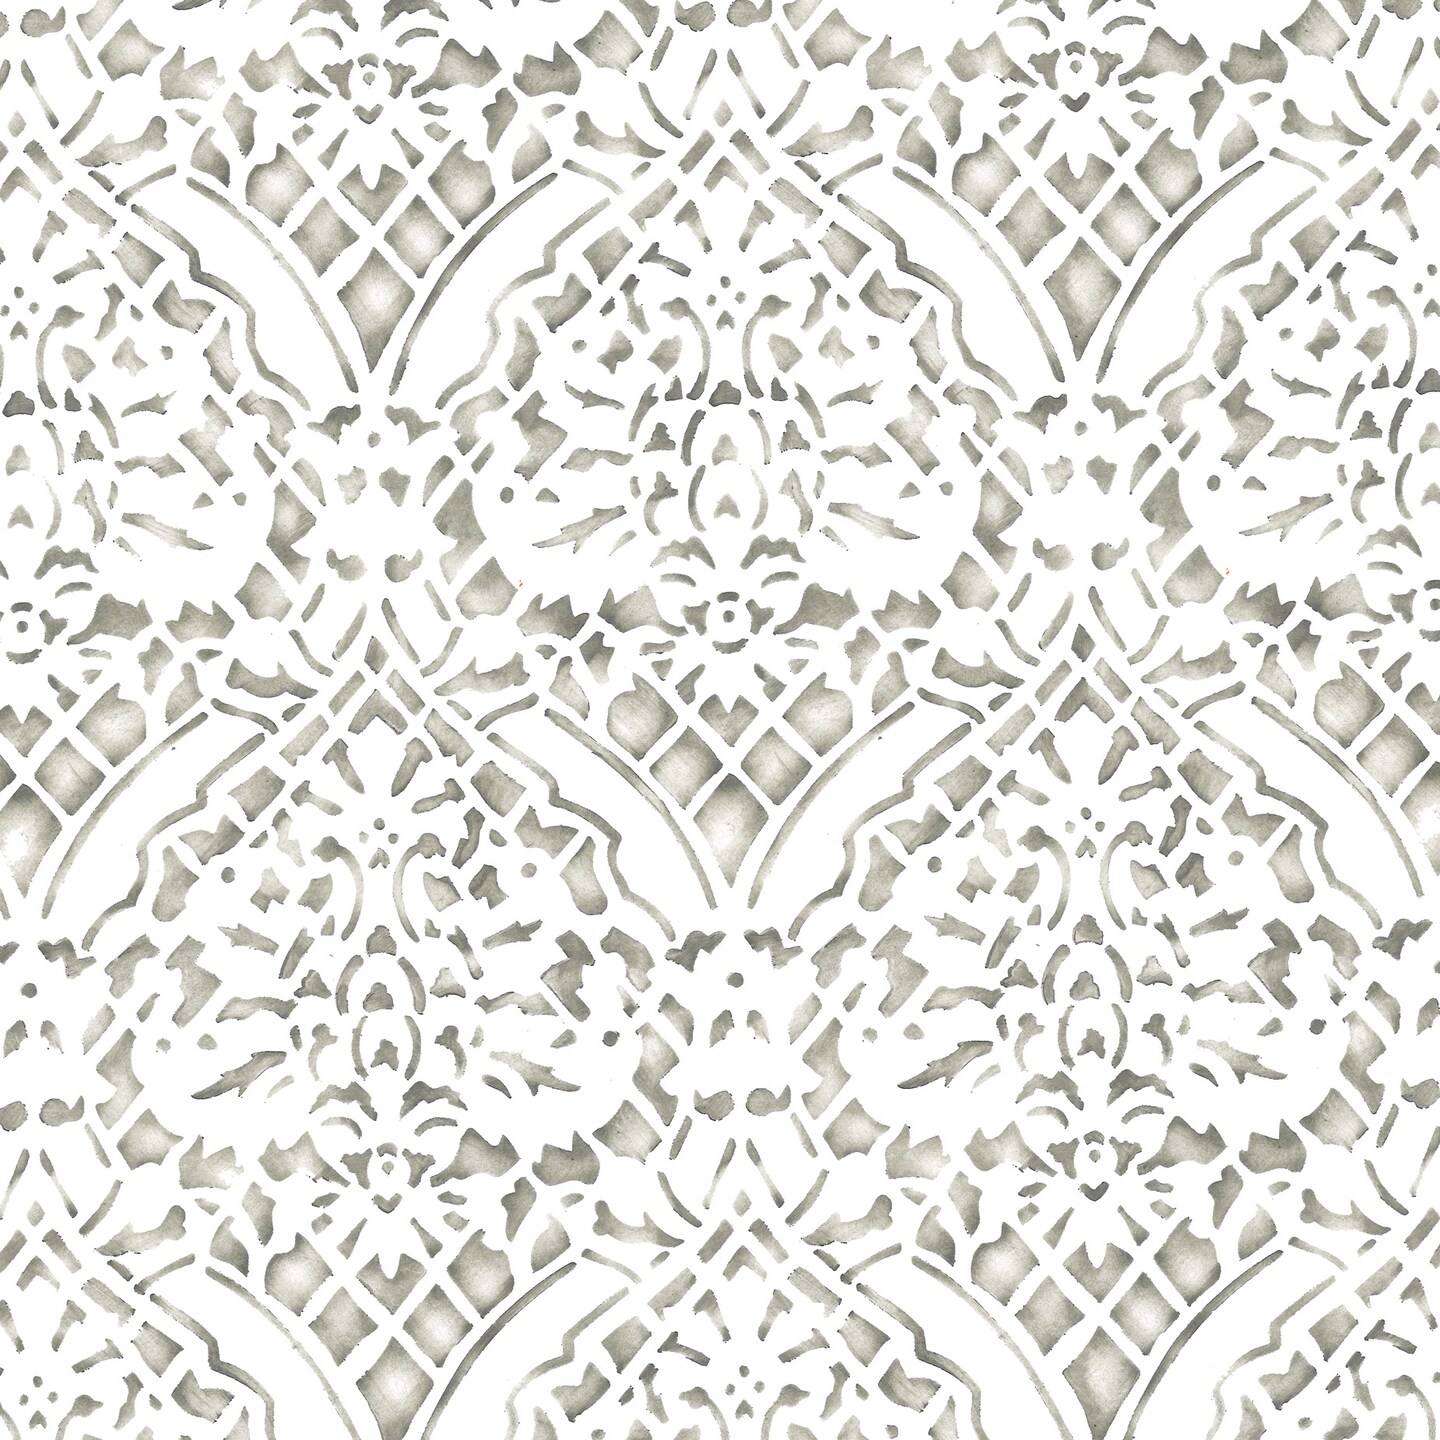 Small Overall Damask | 2497 by Designer Stencils | Pattern Stencils | Reusable Stencils for Painting | Safe &#x26; Reusable Template for Wall Decor | Try This Stencil Instead of a Wallpaper | Easy to Use &#x26; Clean Art Stencil Pattern